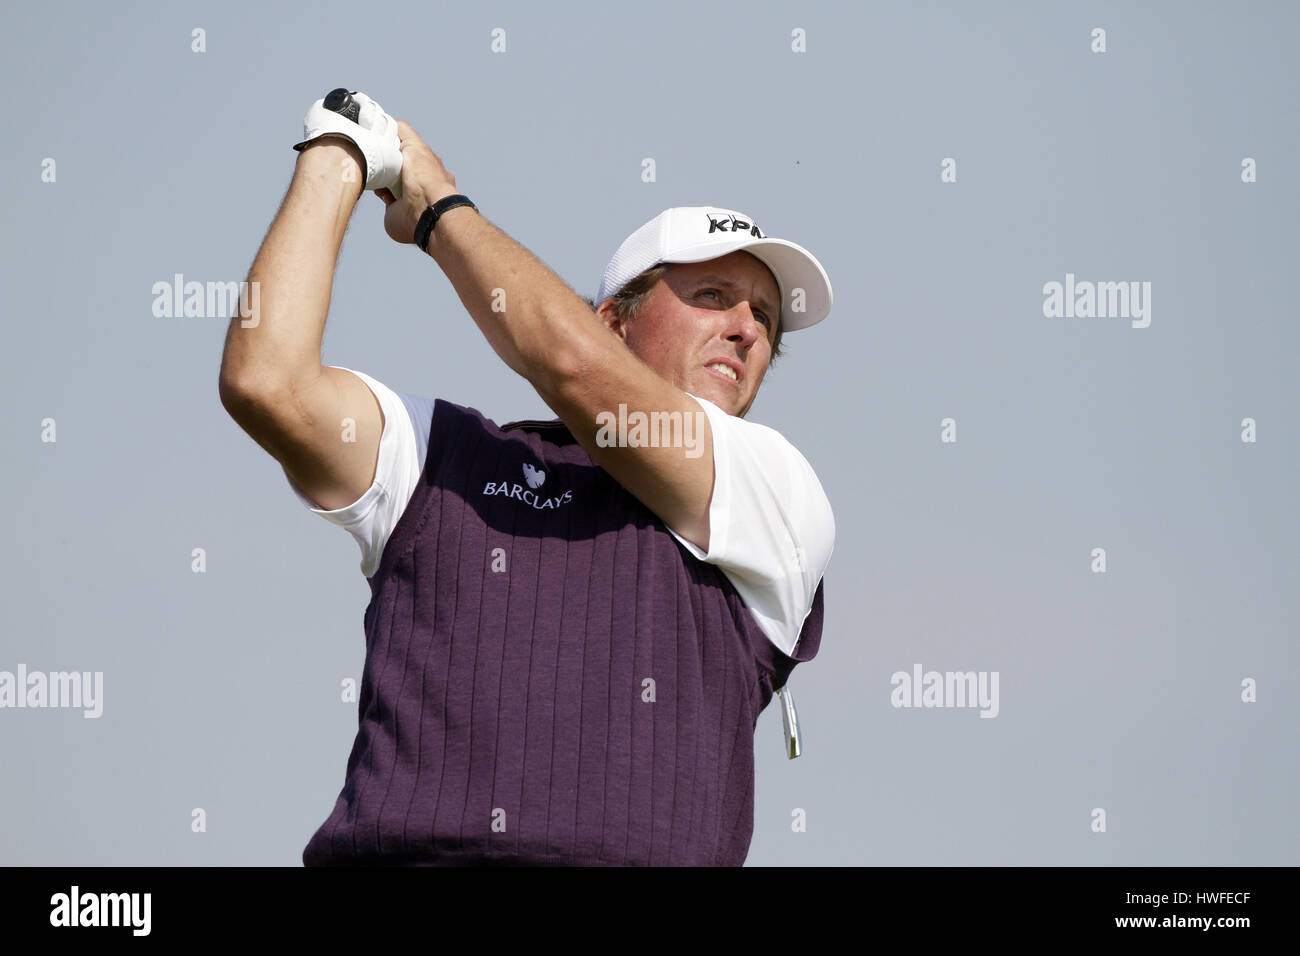 PHIL MICKELSON USA USA ROYAL ST.GEORGE'S SANDWICH KENT ENGLAND 15 July 2011 Stock Photo